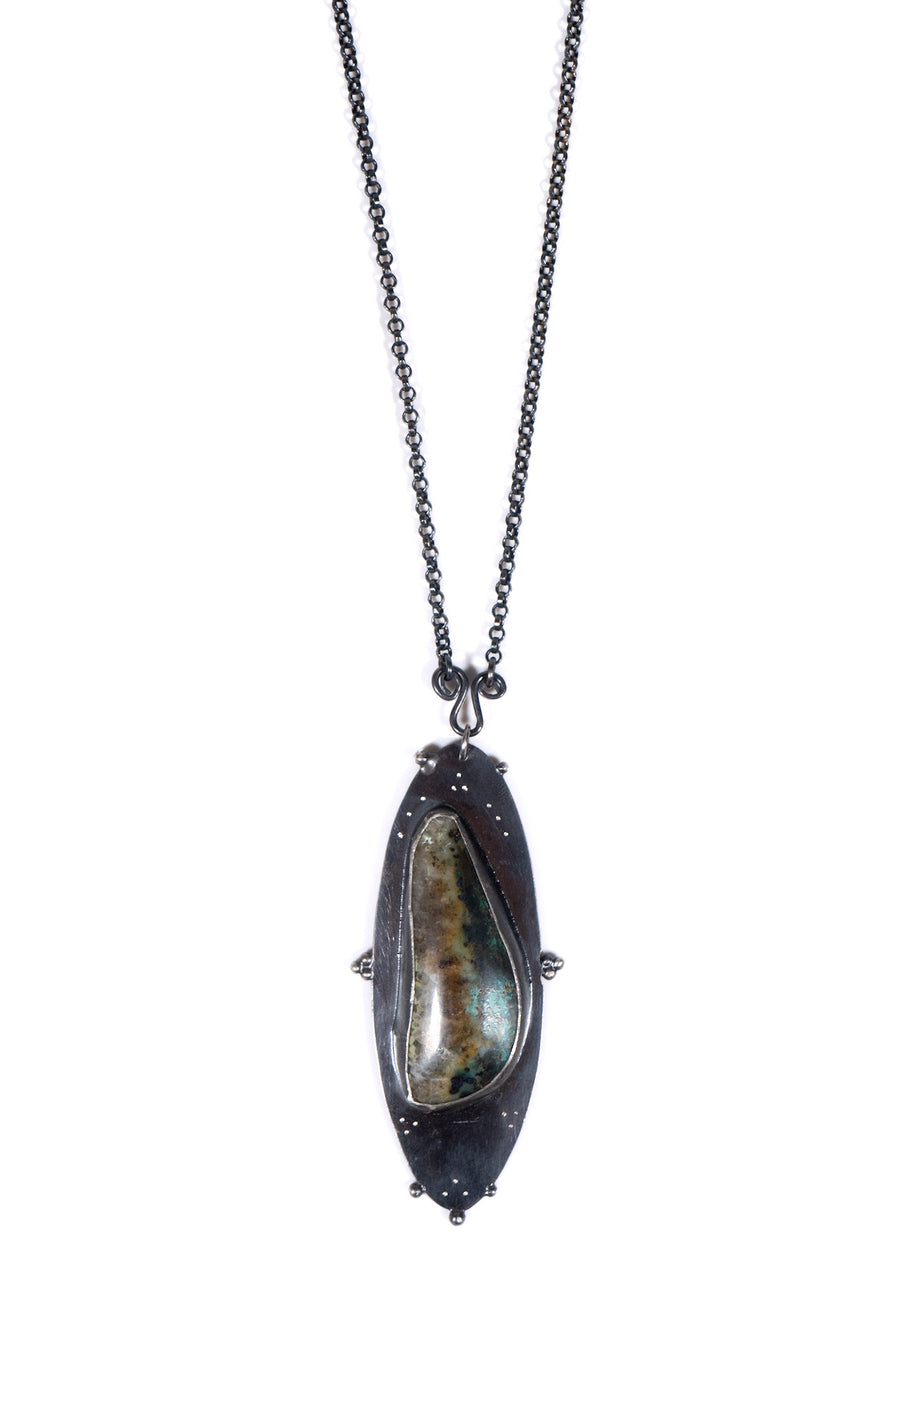 Washougal River Amulet Necklace SS 21" Quartz w/Chrysocolla by Unearthed Minerals